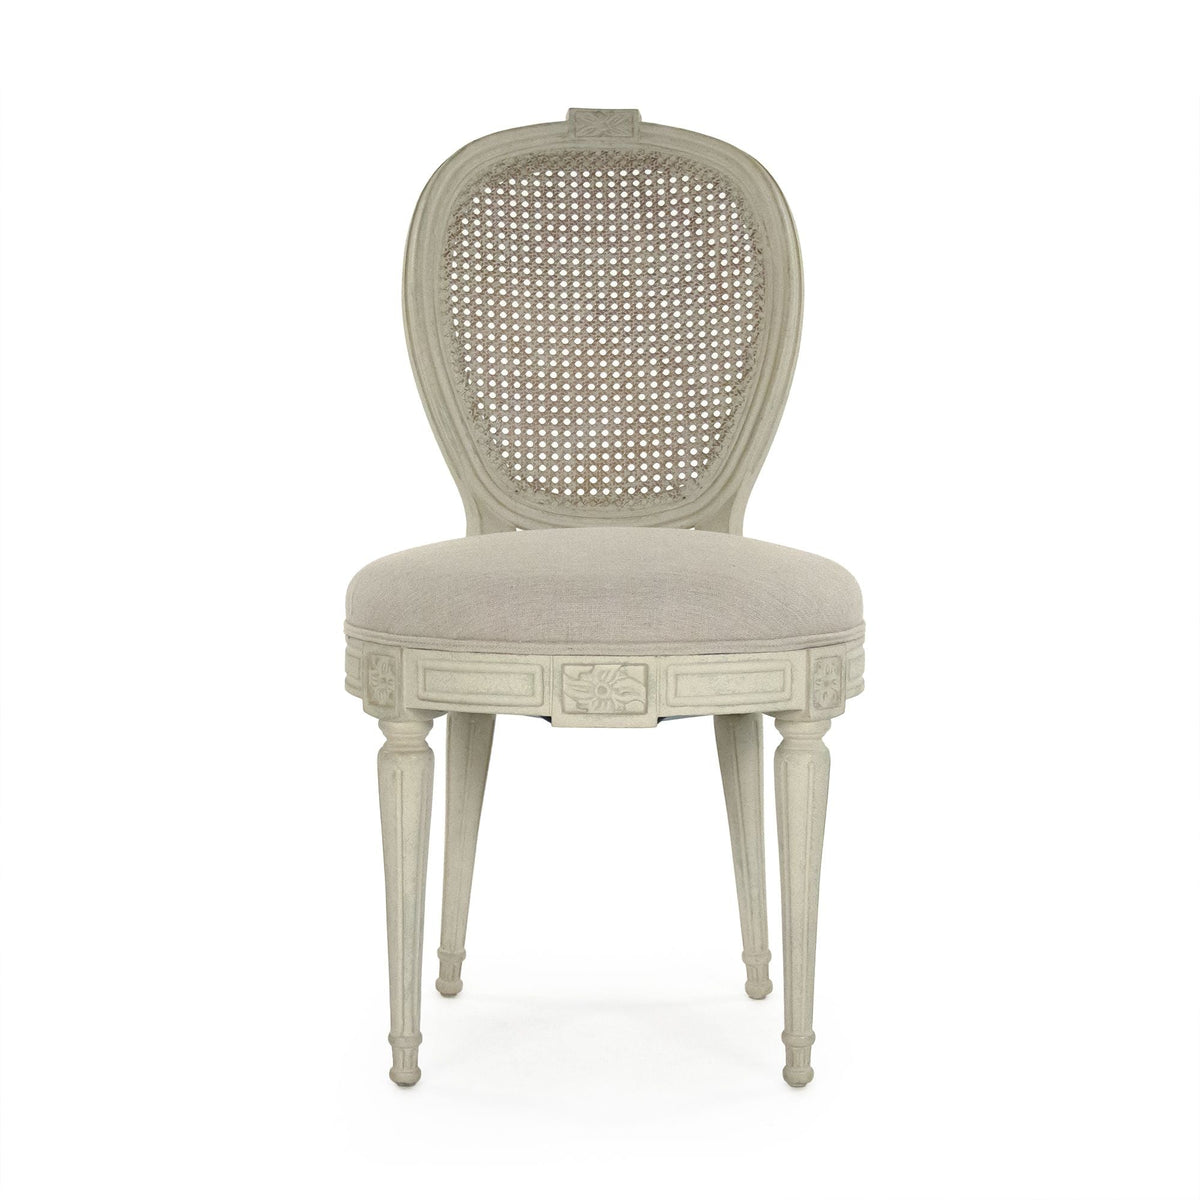 Aimee Side Chair by Zentique